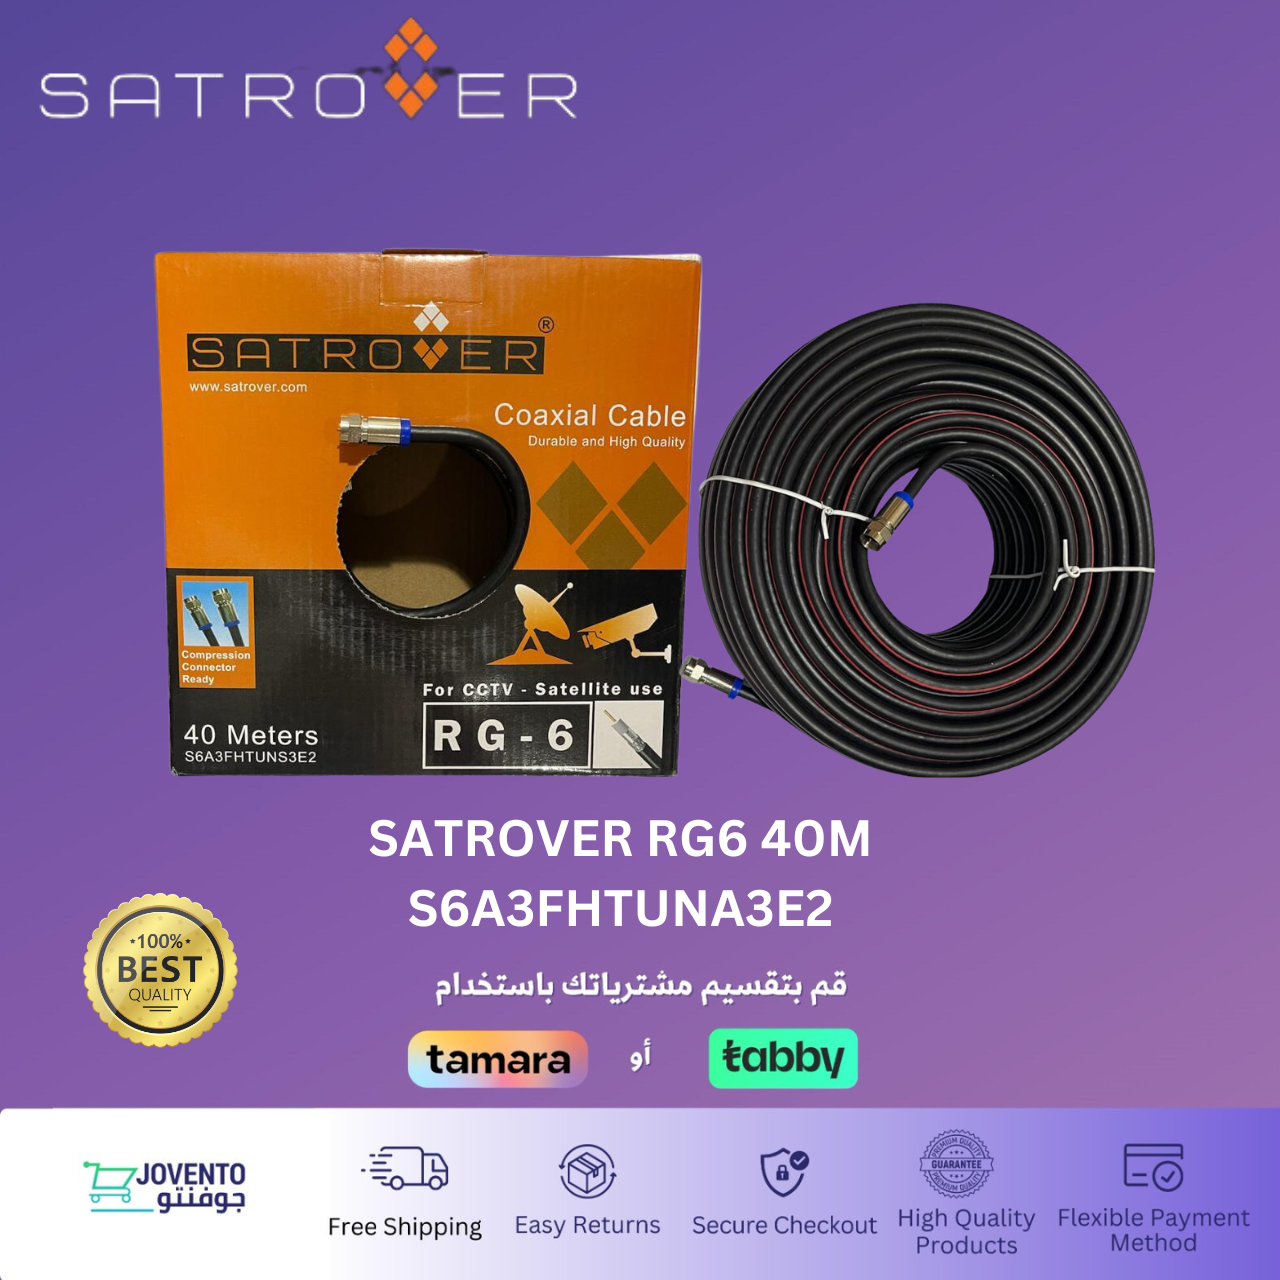 SATROVER 40M RG6 Coaxial Cable - Durable and High-Quality